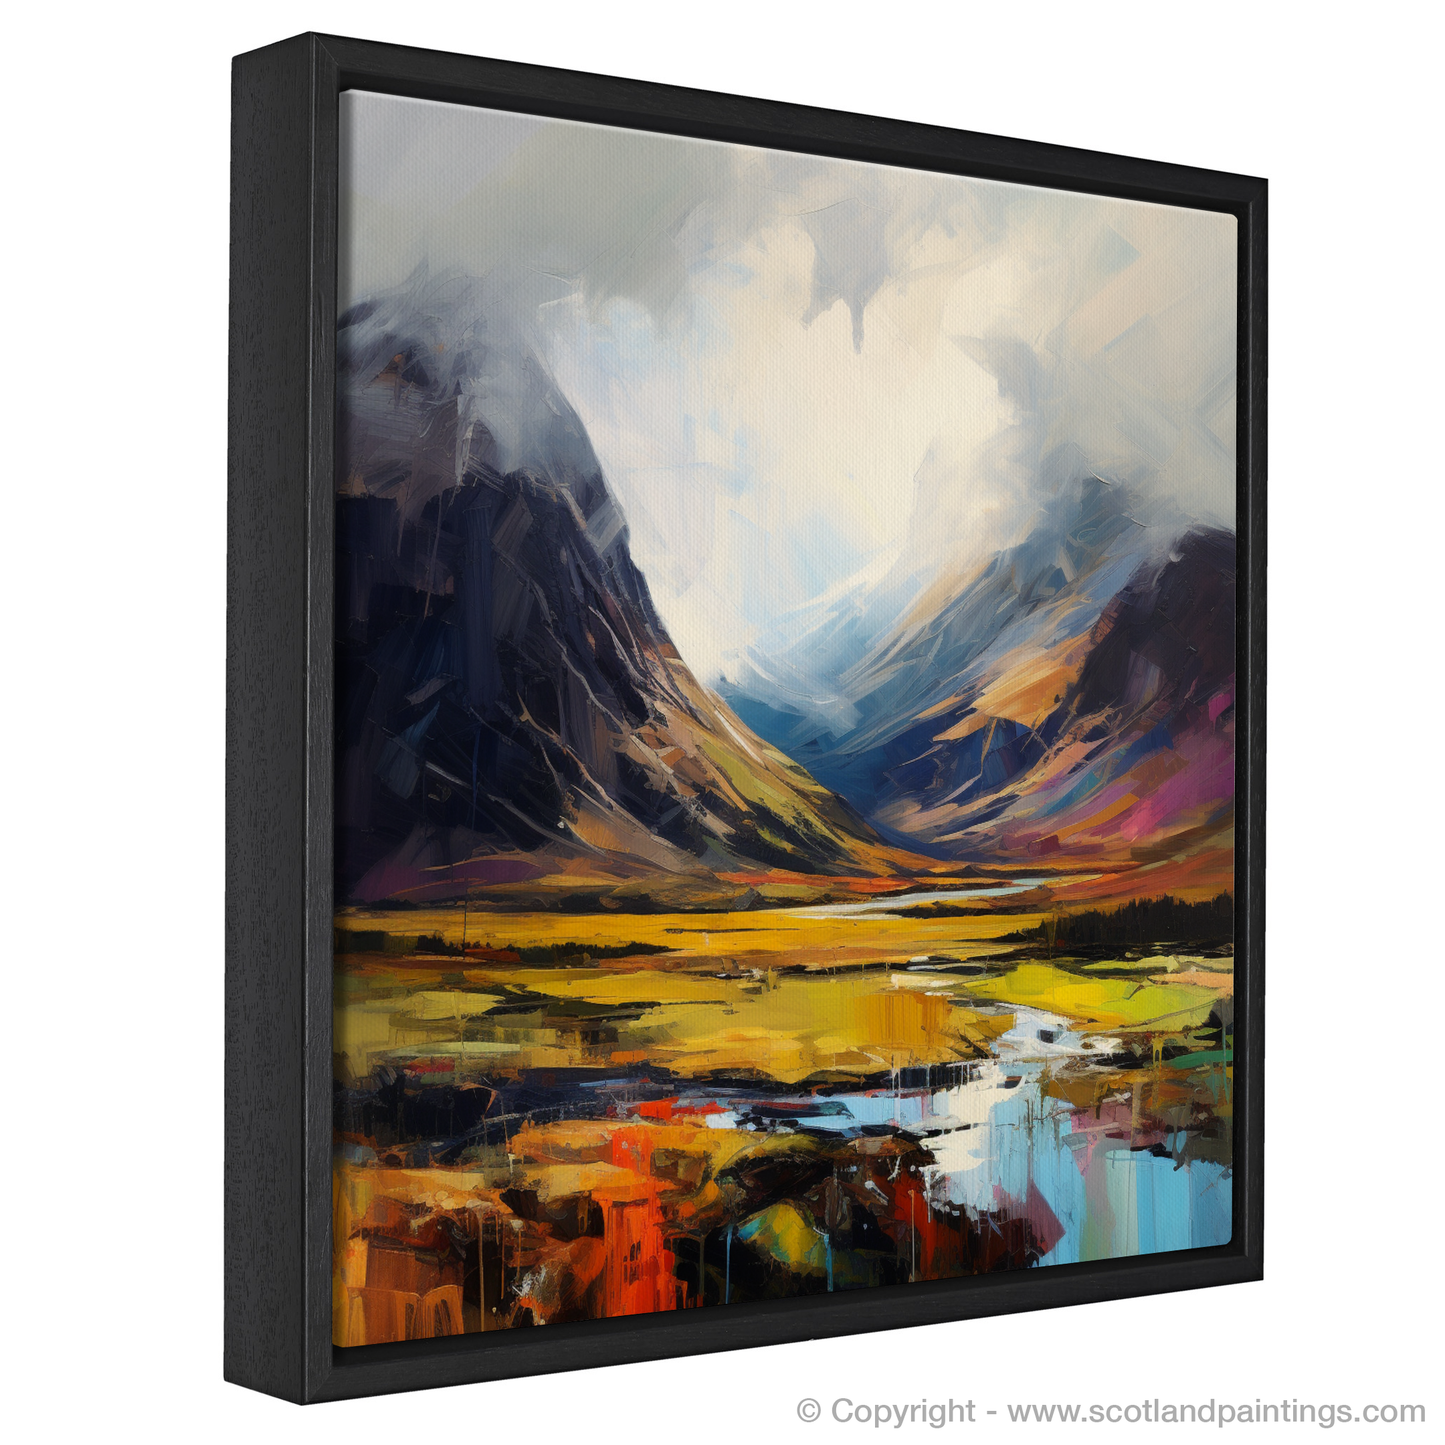 Painting and Art Print of Ben Nevis, Highlands. Highland Majesty: An Expressionist Tribute to Ben Nevis.